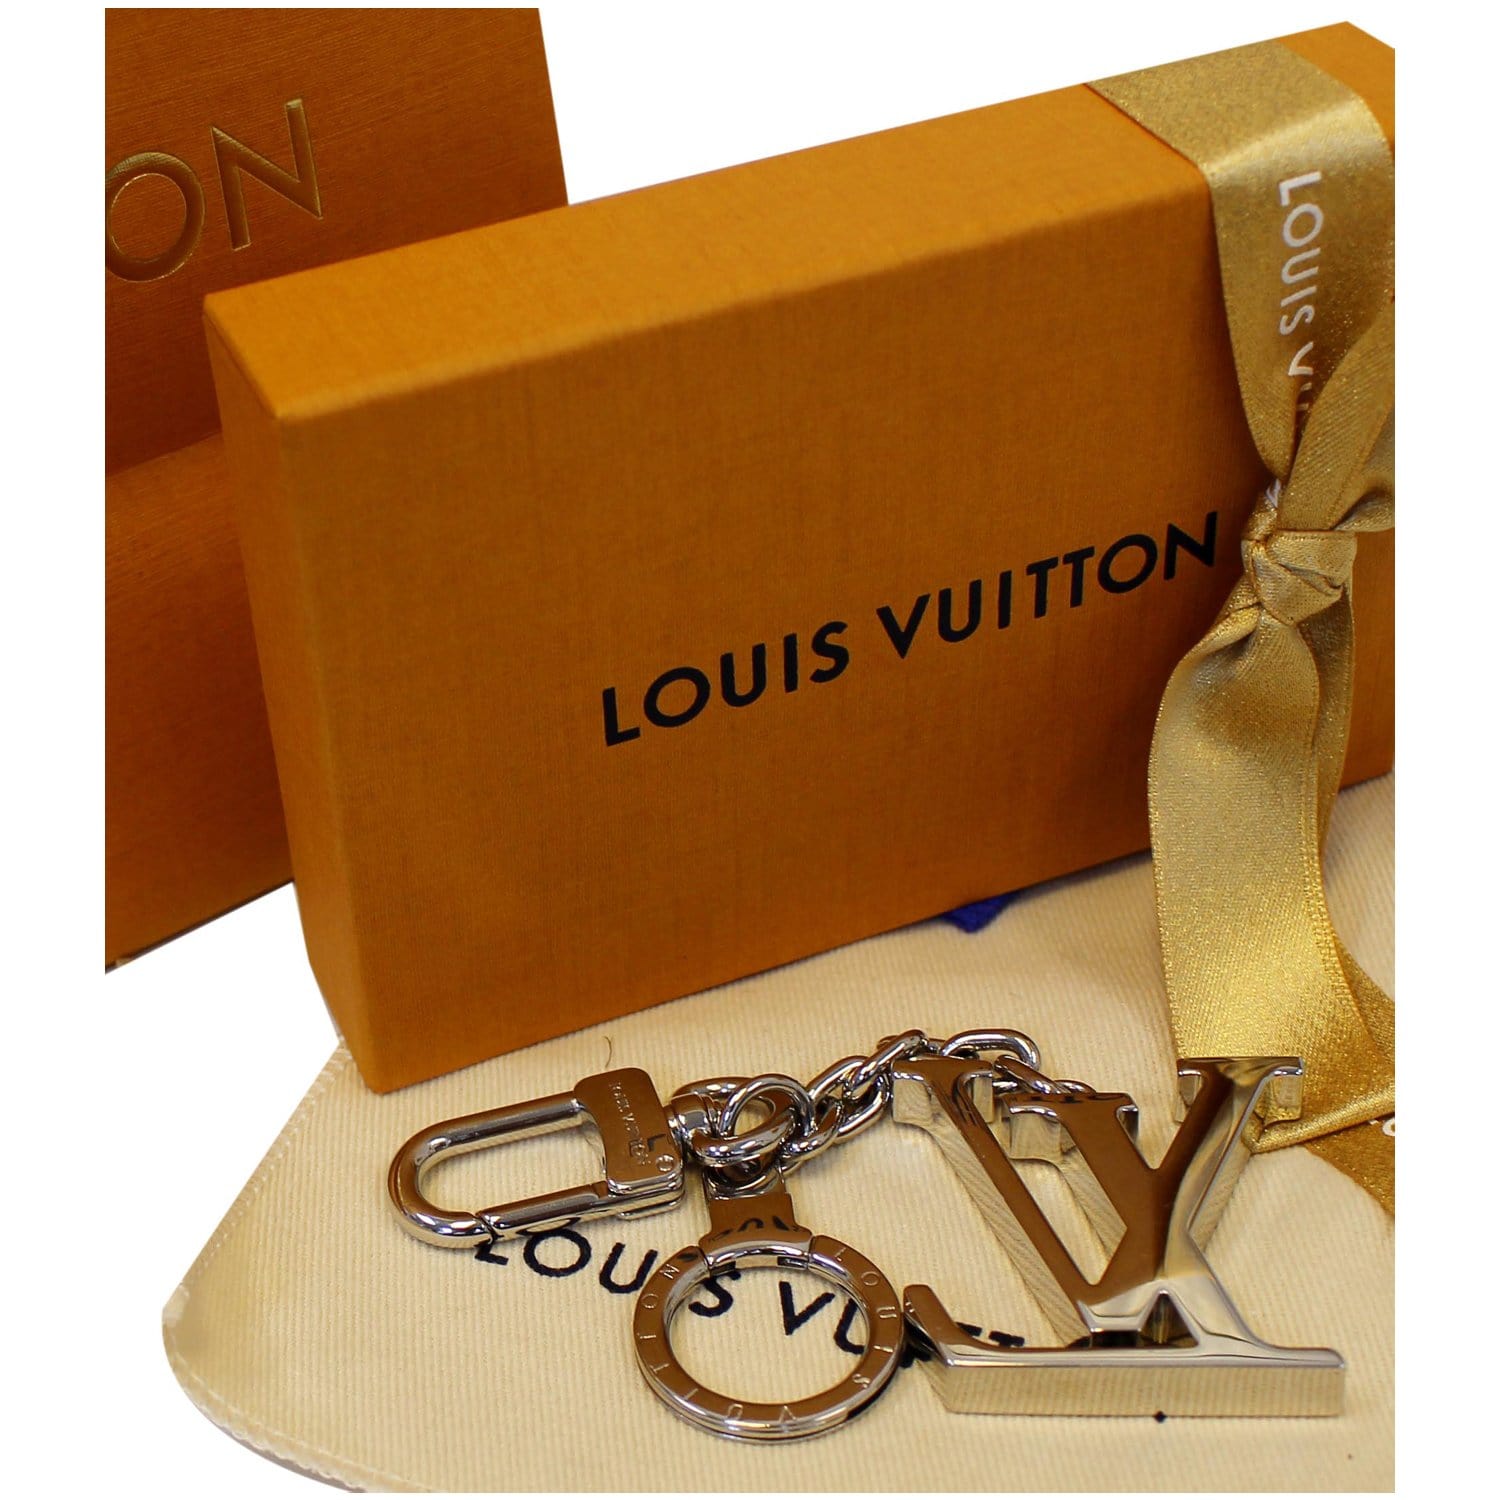 Louis Vuitton Wallet Chain Strap Charm Gold LV Key Ring Bag Charm Used